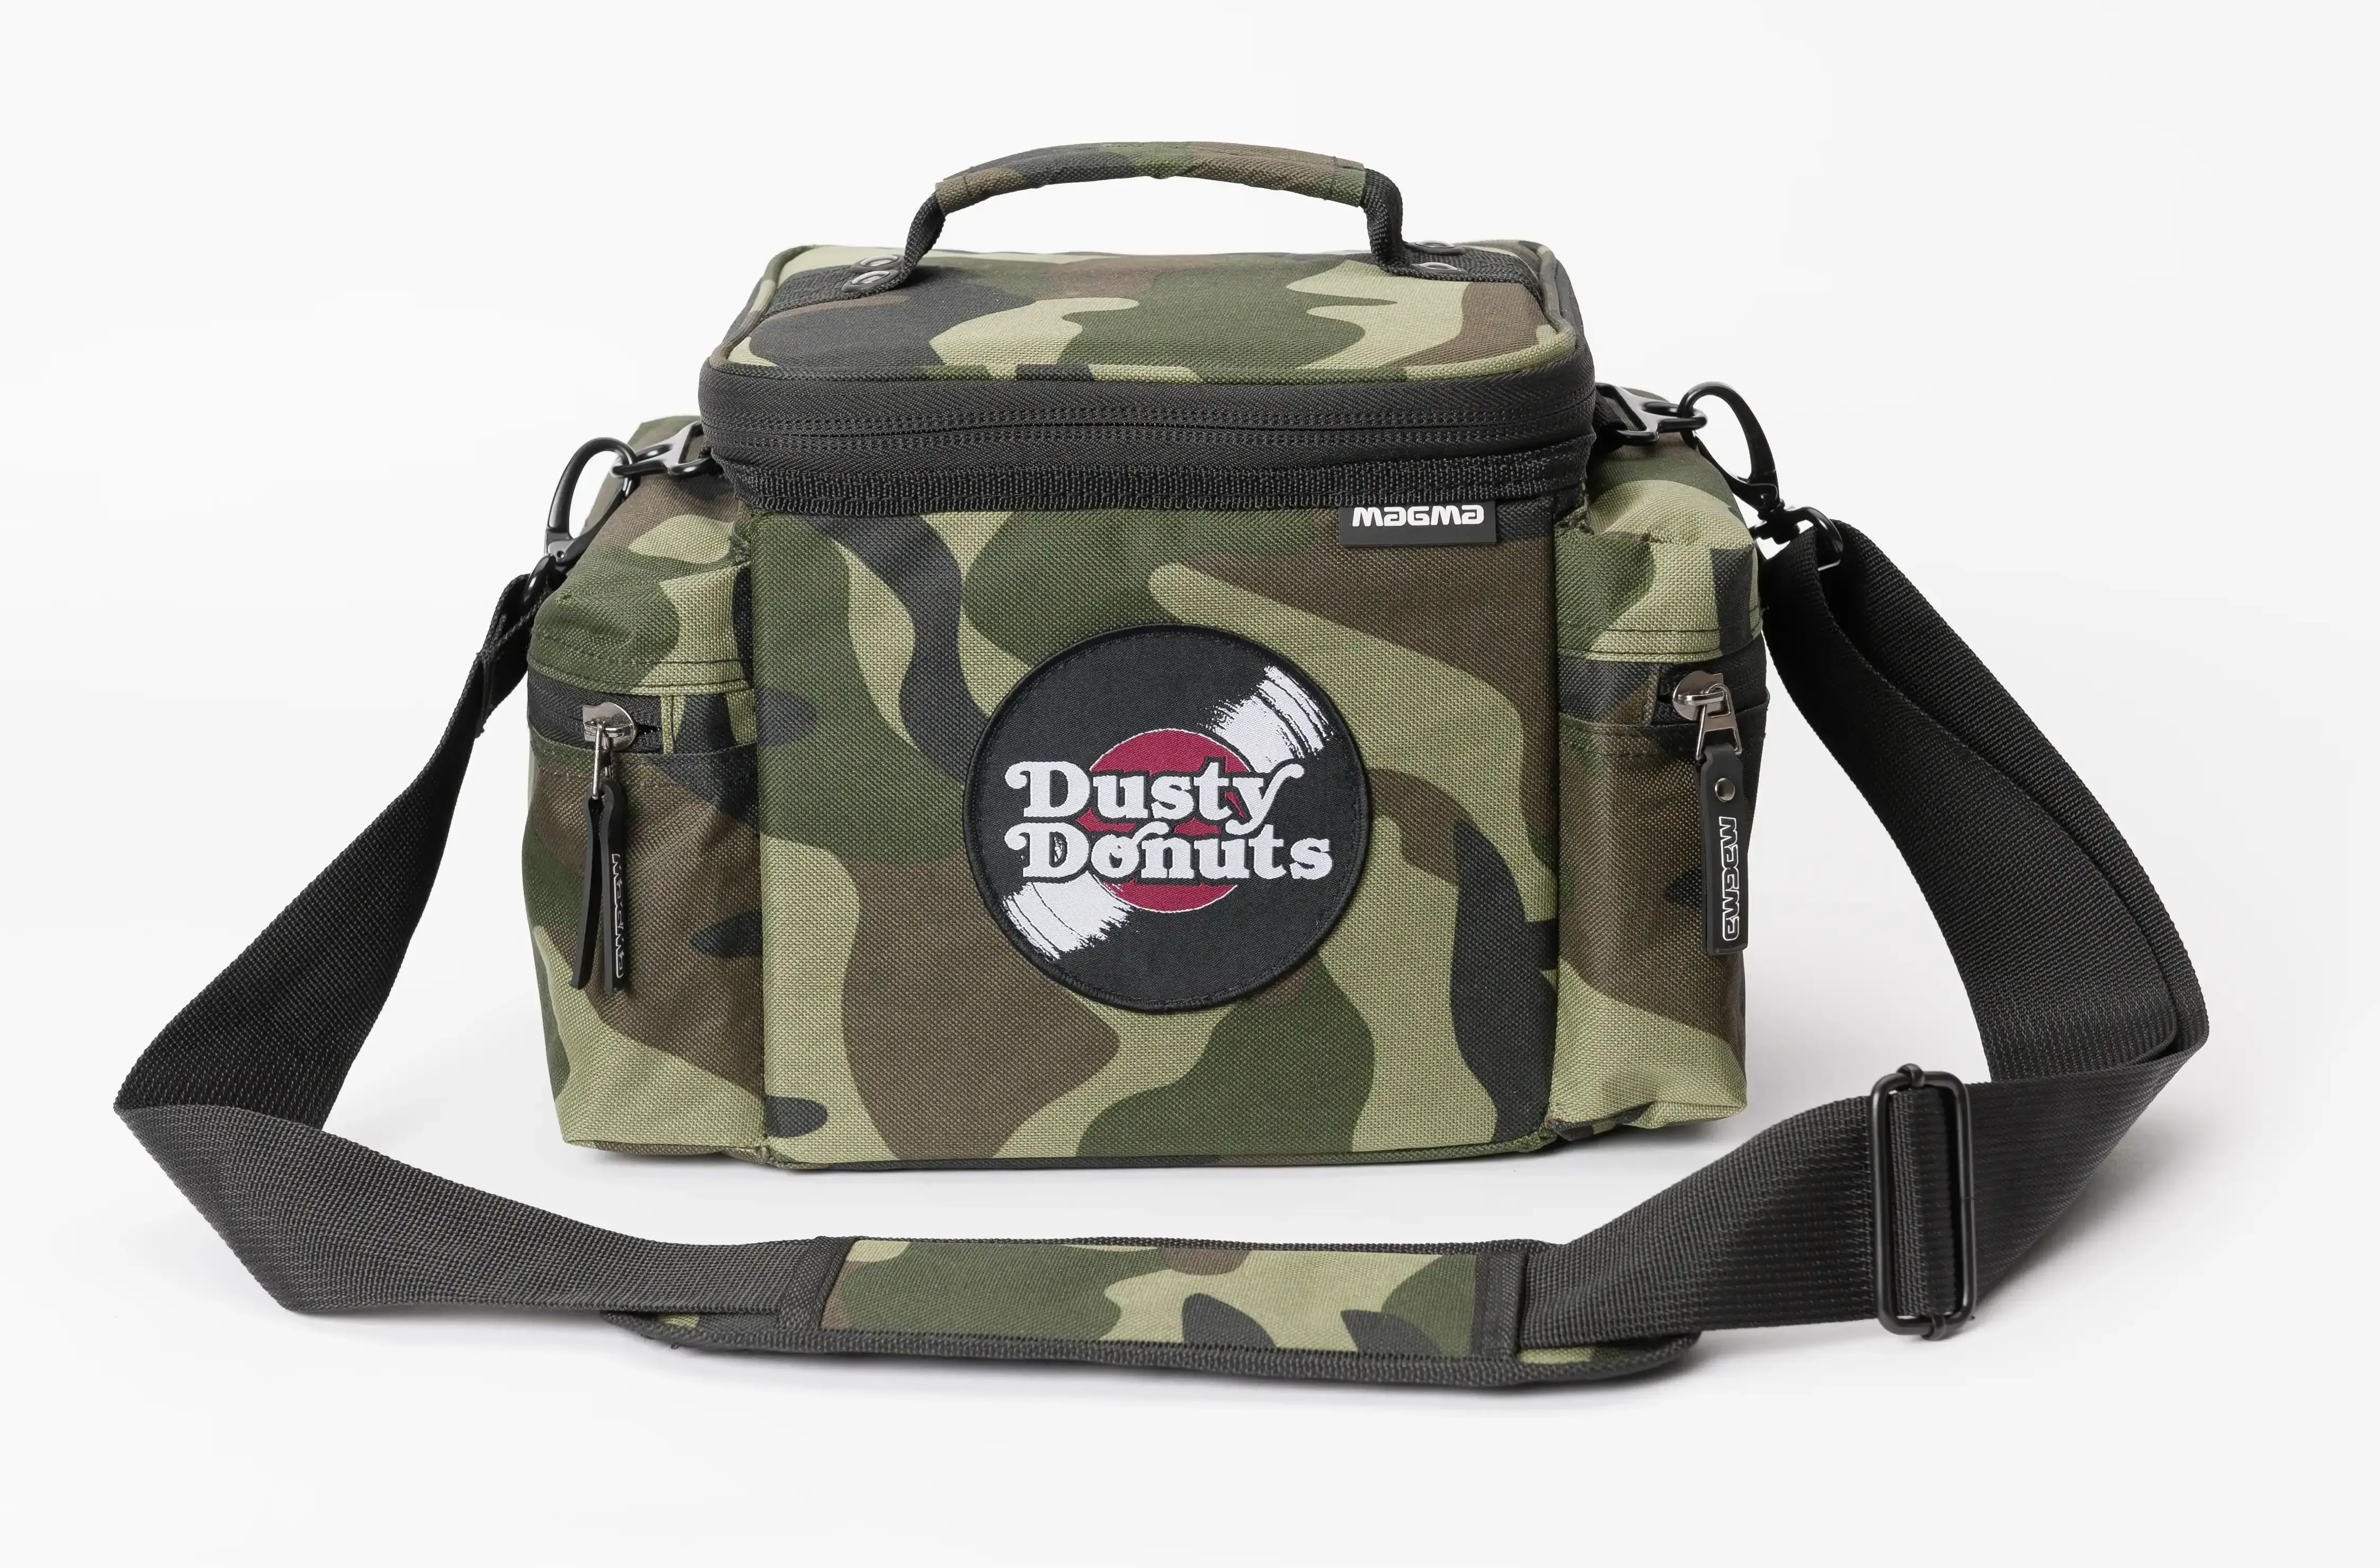 Magma 45 Record Bag 100 Dusty Donuts Edition Camo Green / Red 